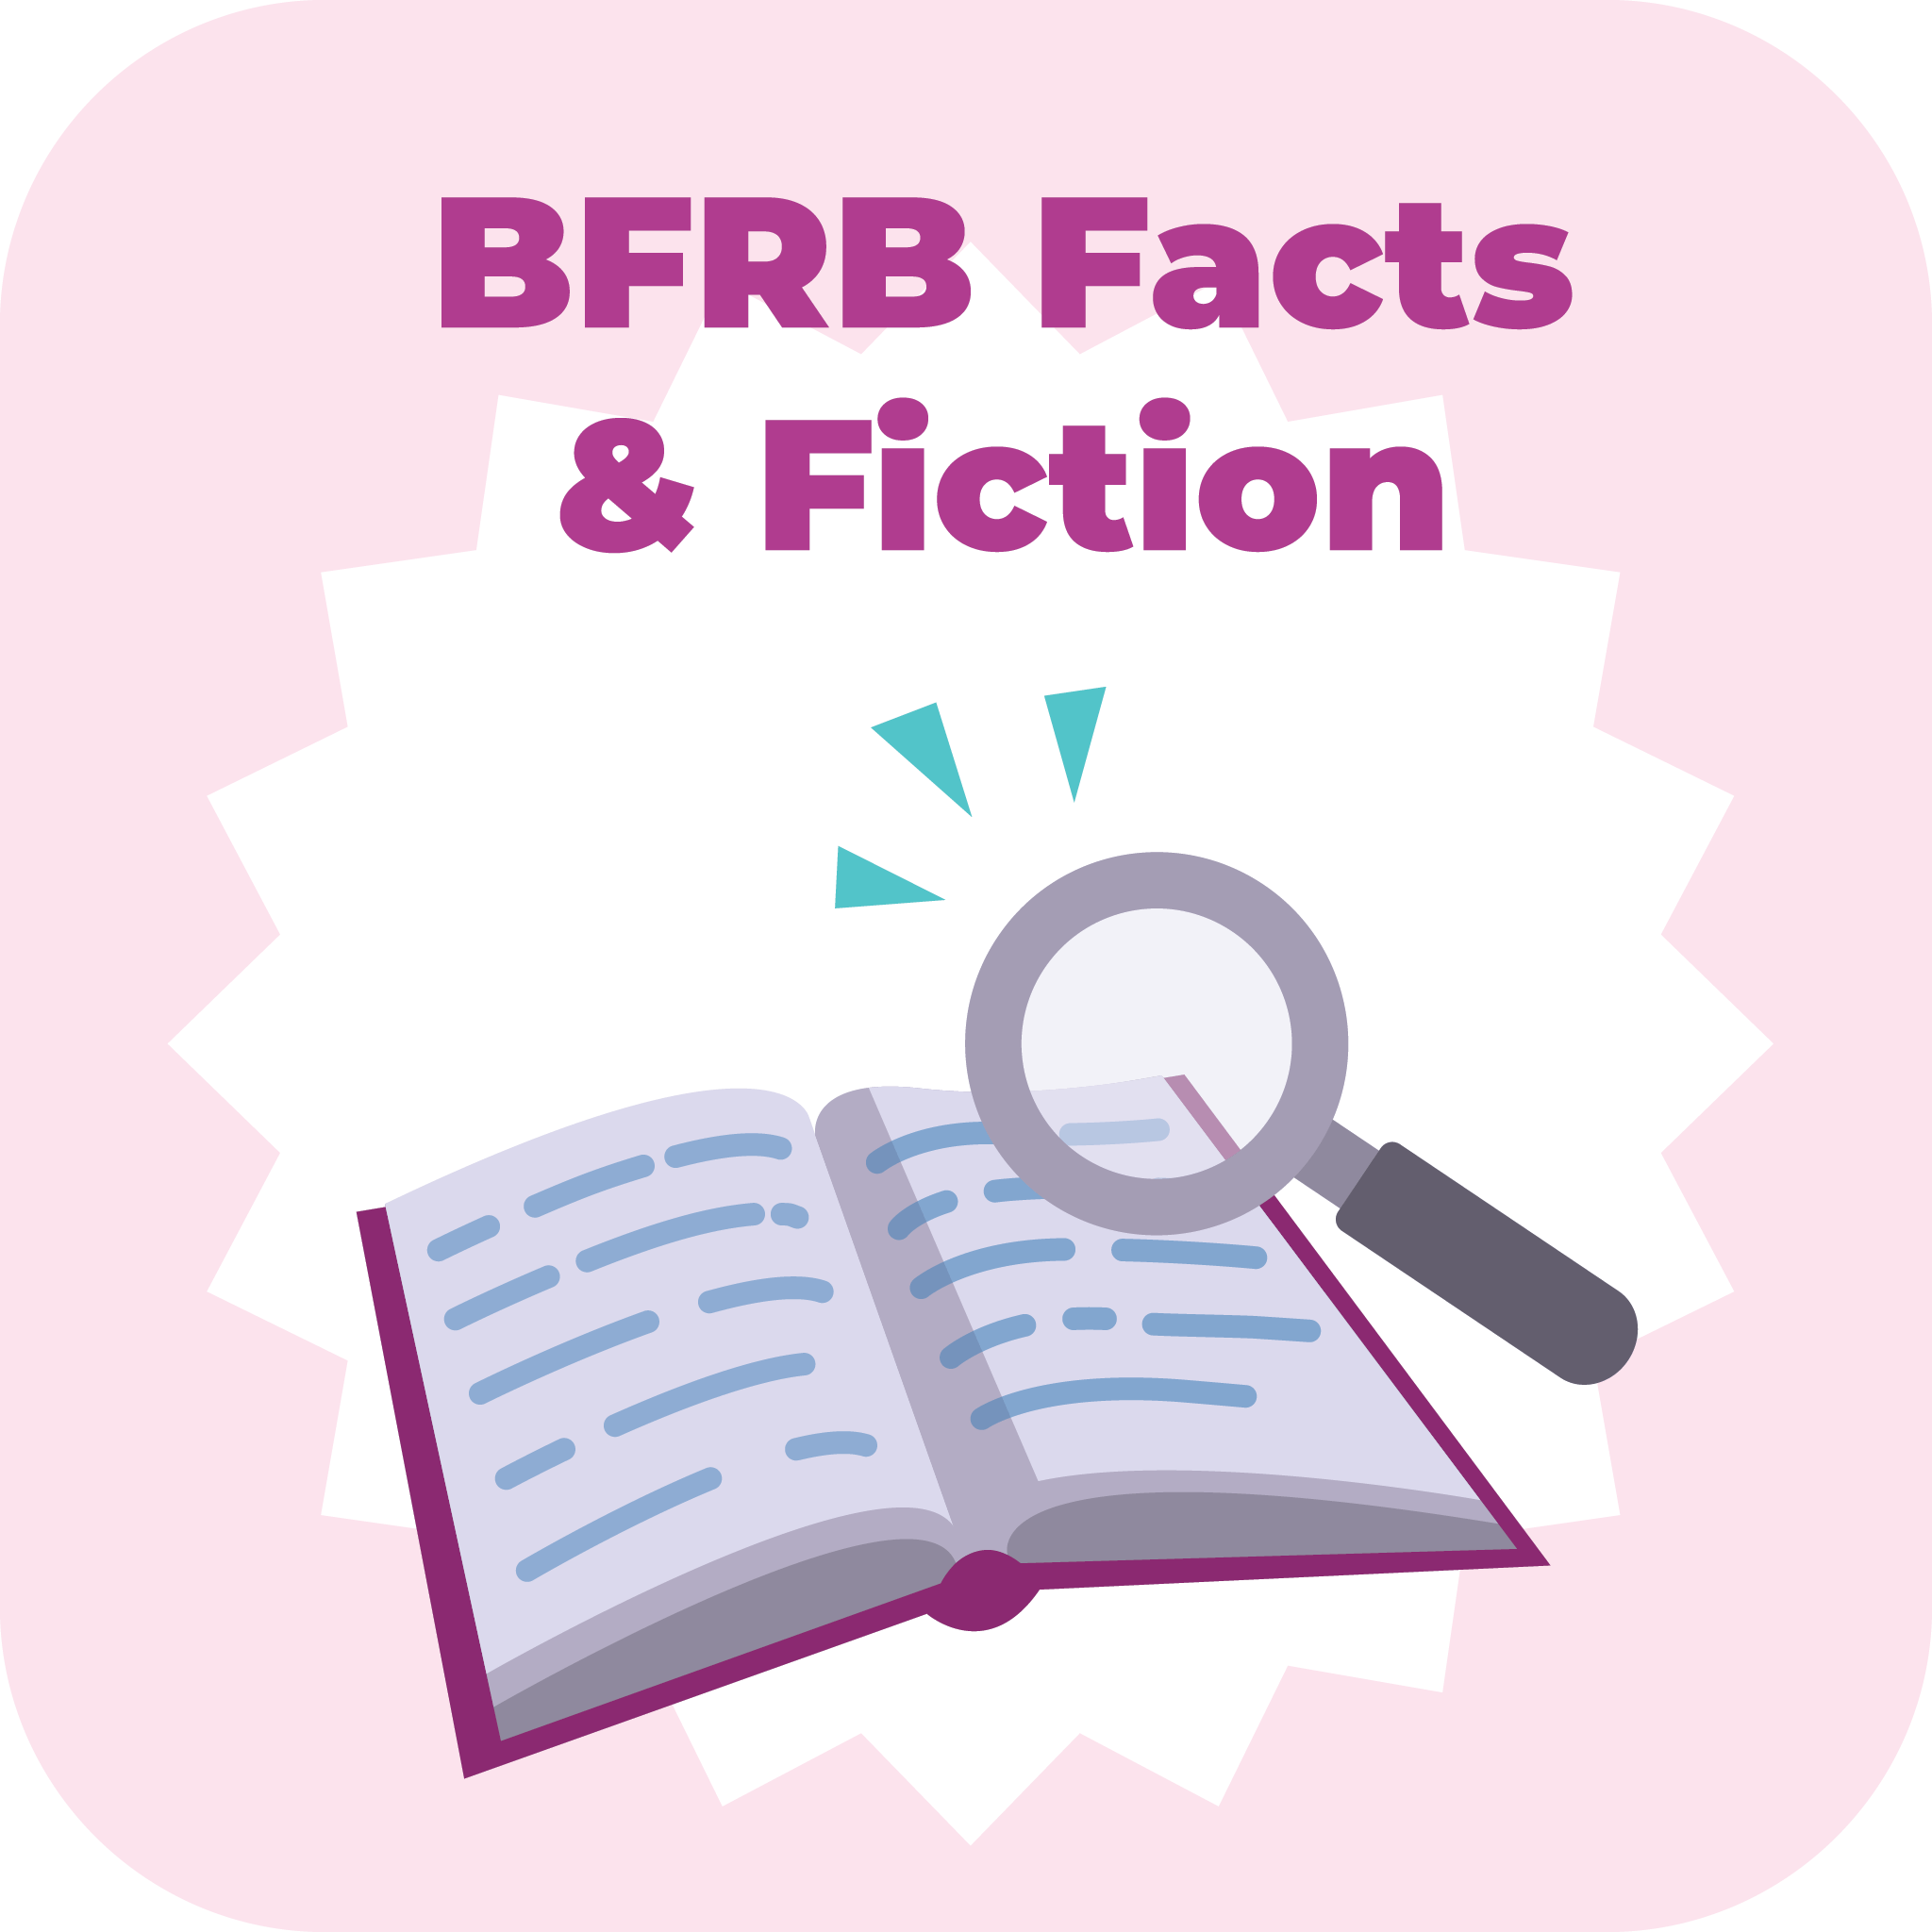 Bfrf facts and fiction.